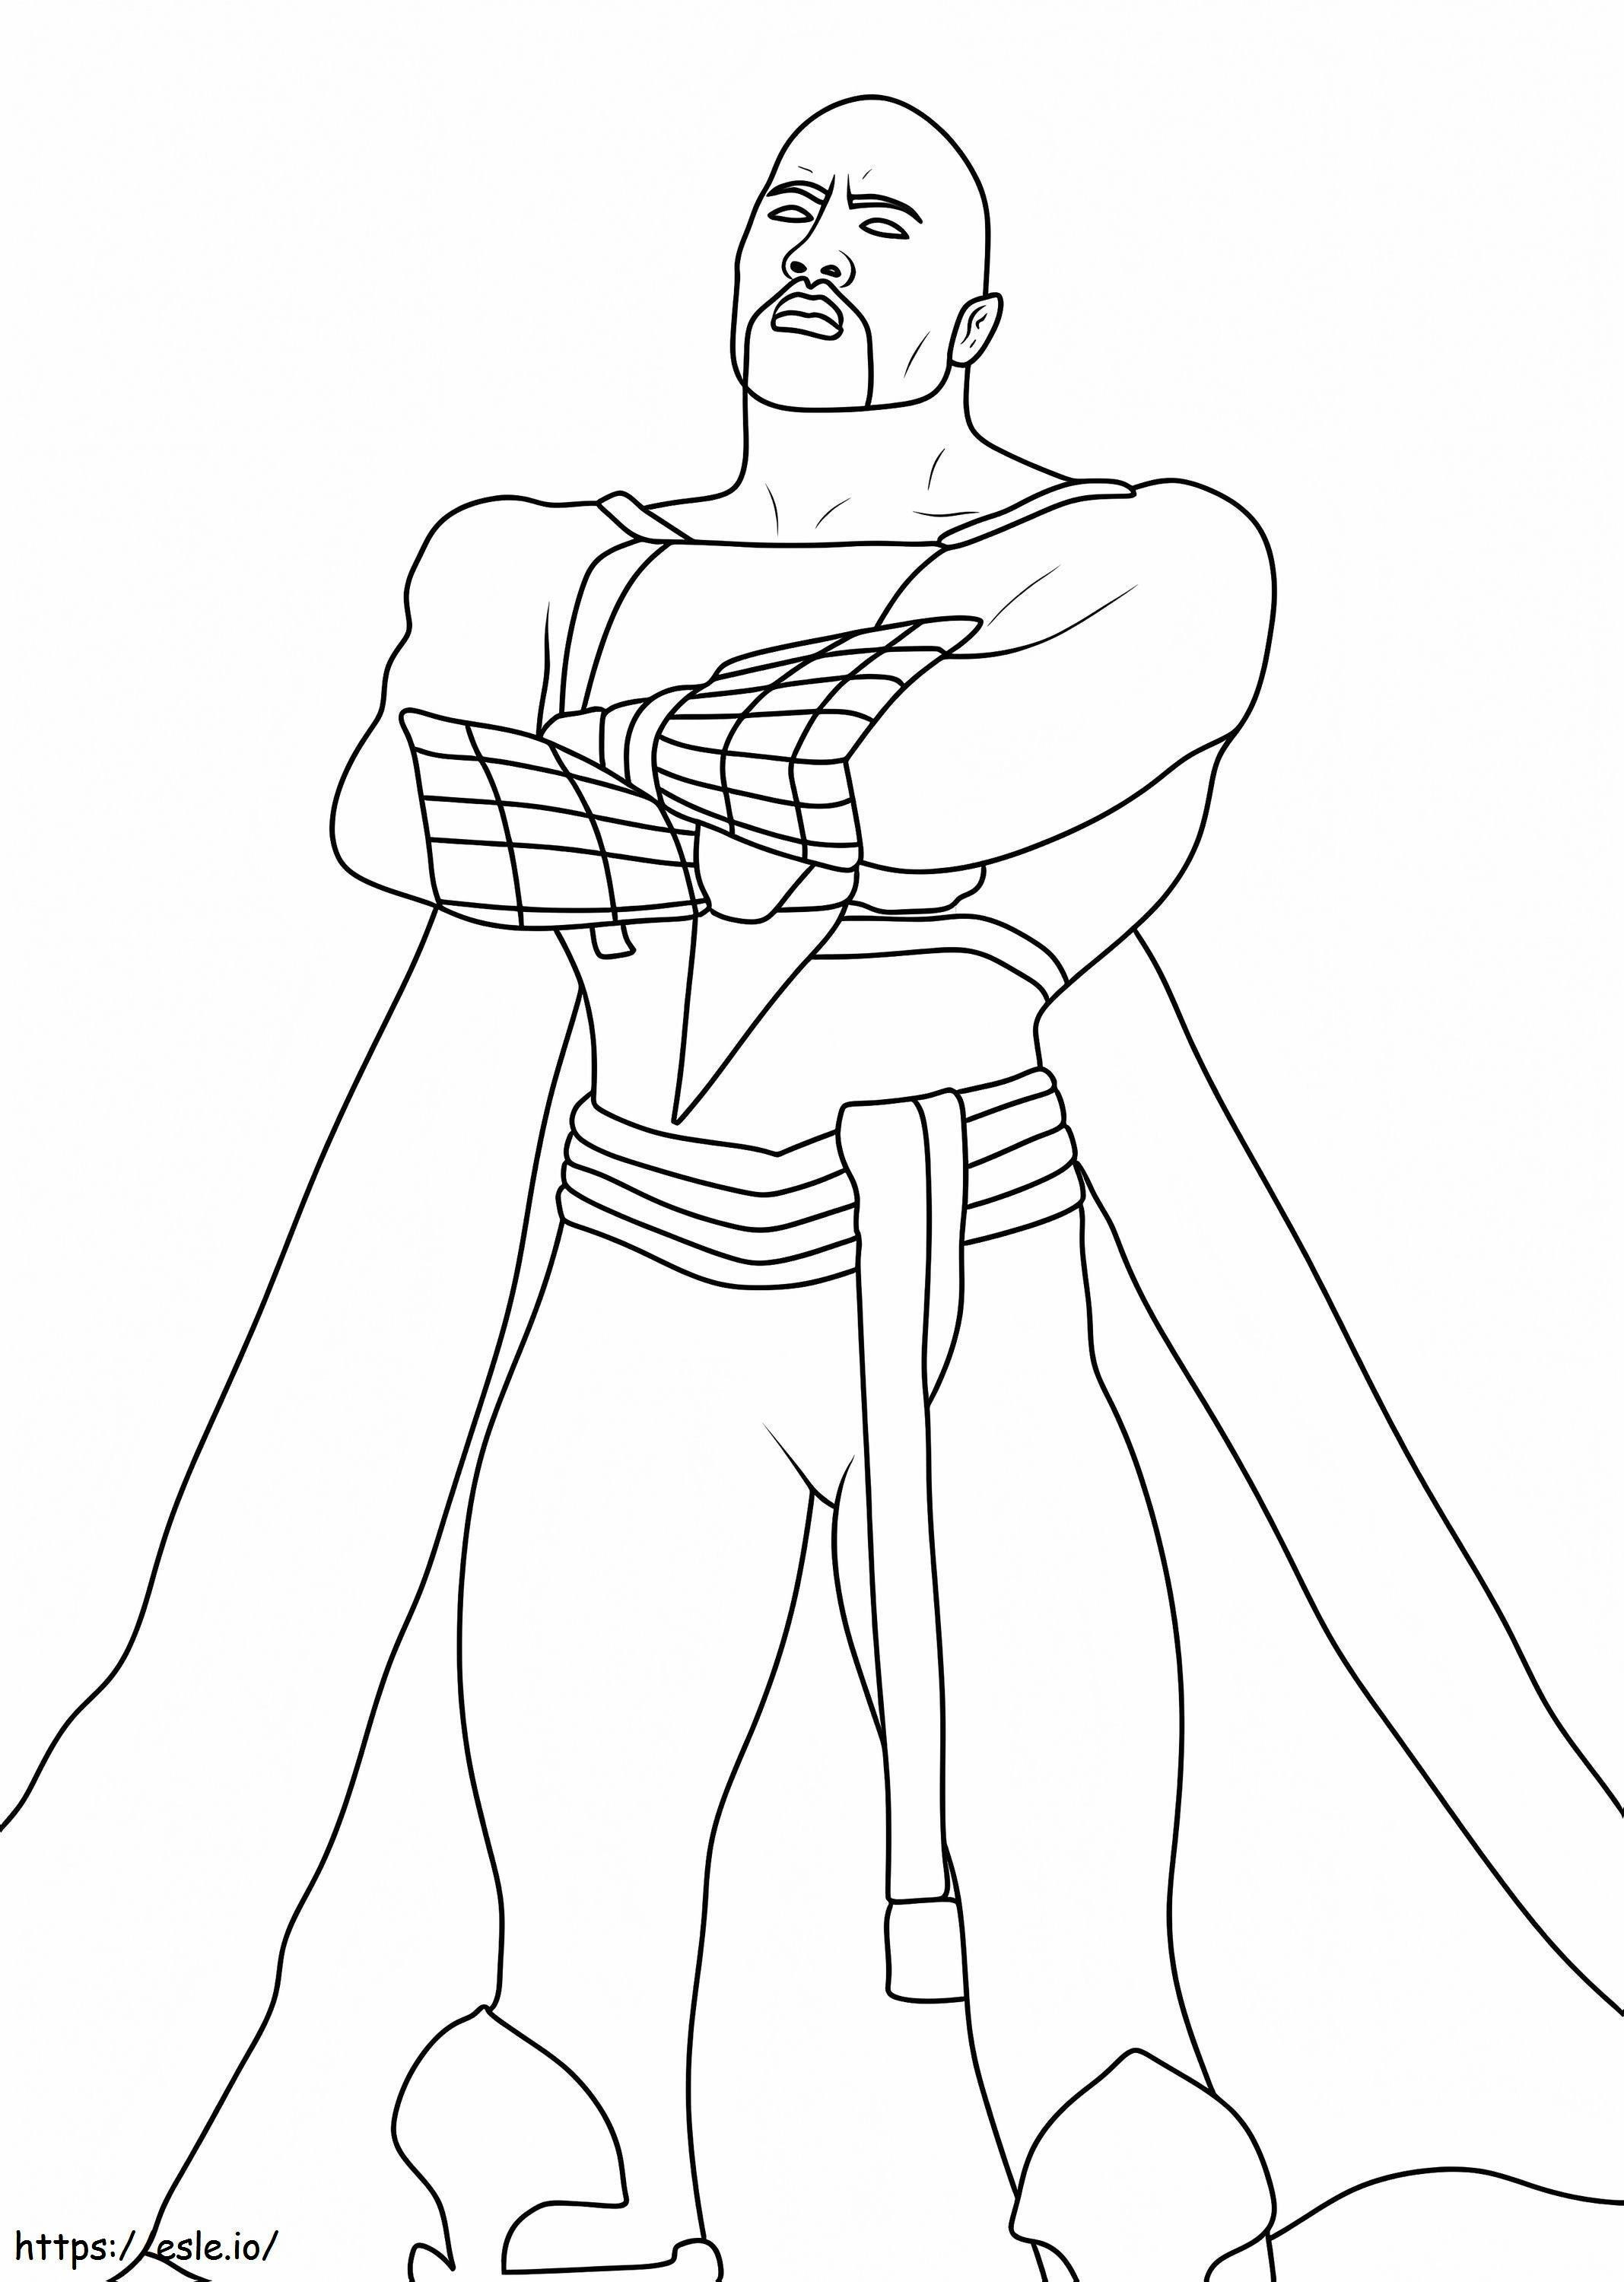 Strong Black Adam coloring page